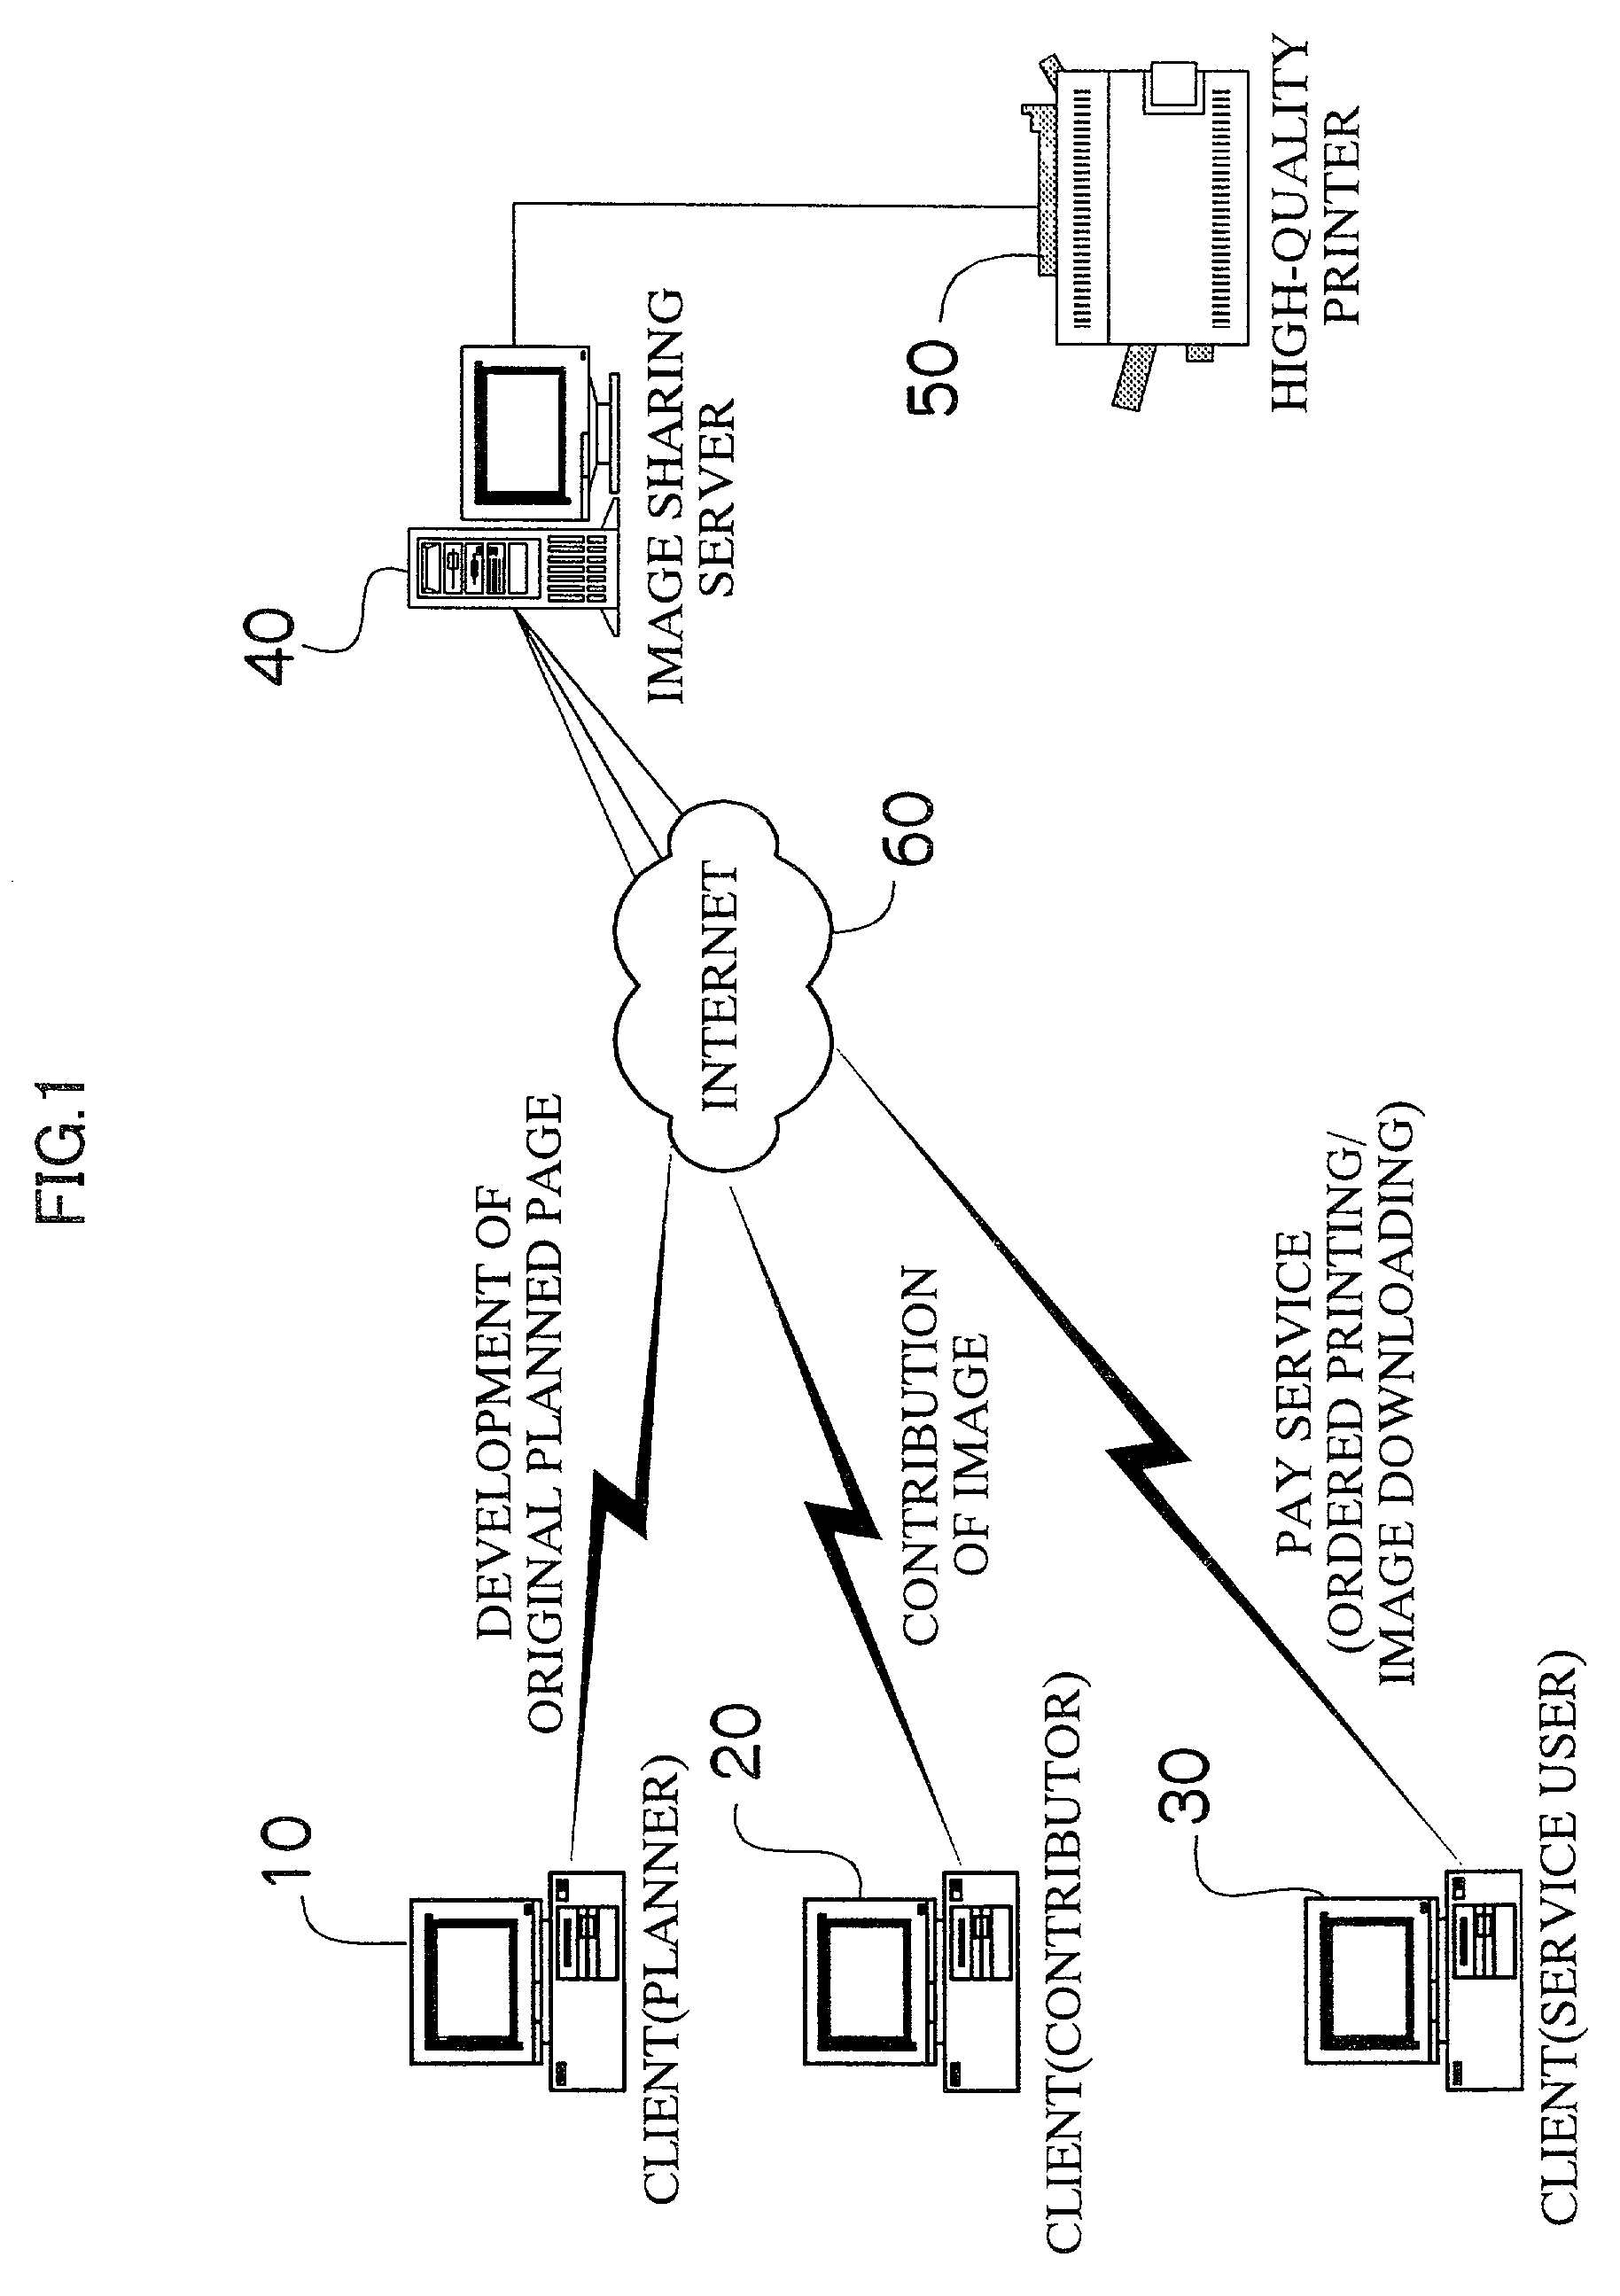 System and method for offering information service, method of assisting information release service, and information sharing server